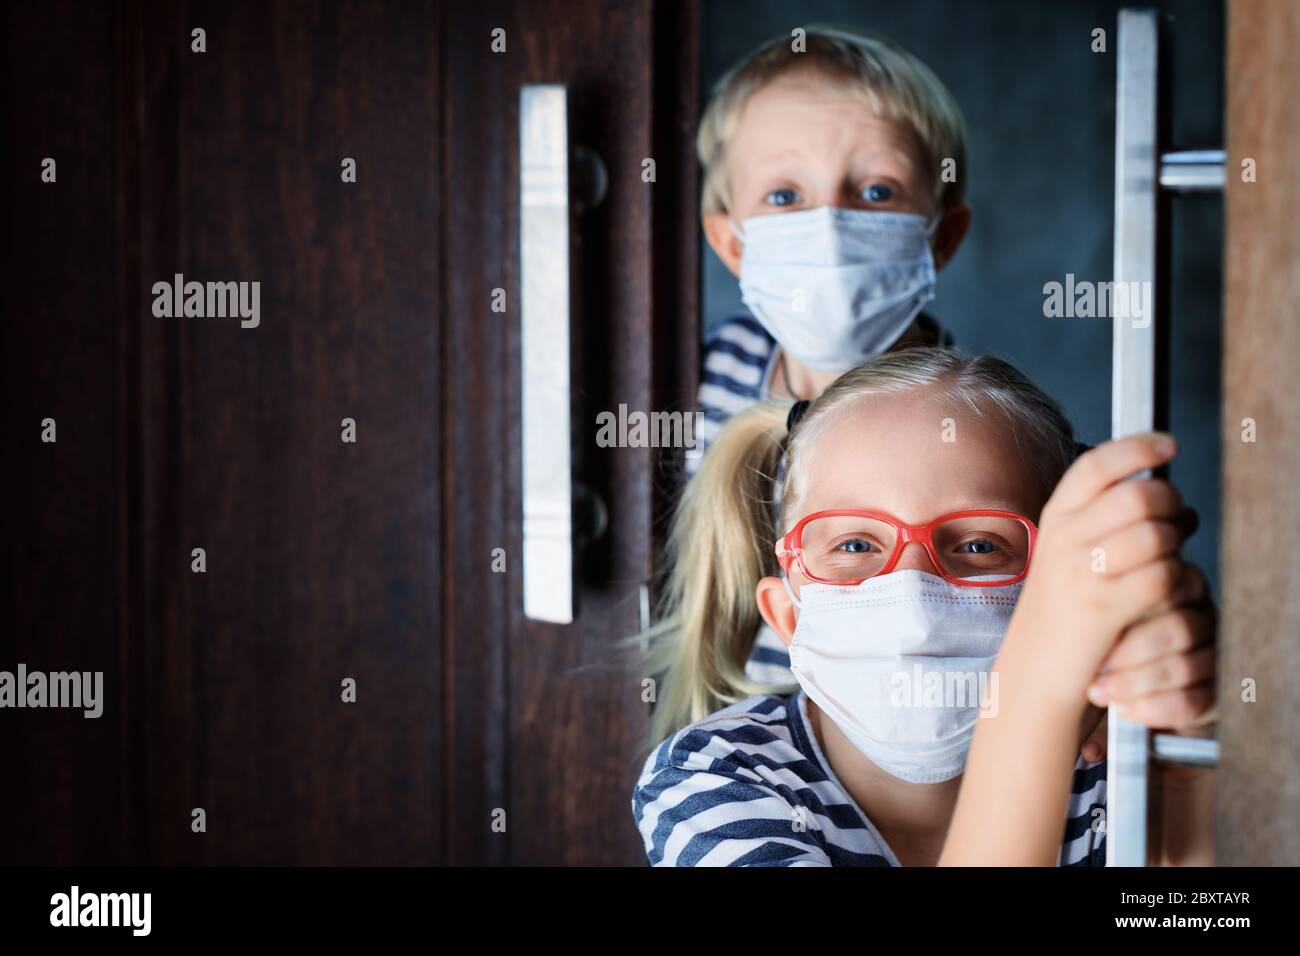 Little children looking out opened door after staying at home due banned street activity. Kids wearing medical face masks go out for outside walk. Stock Photo